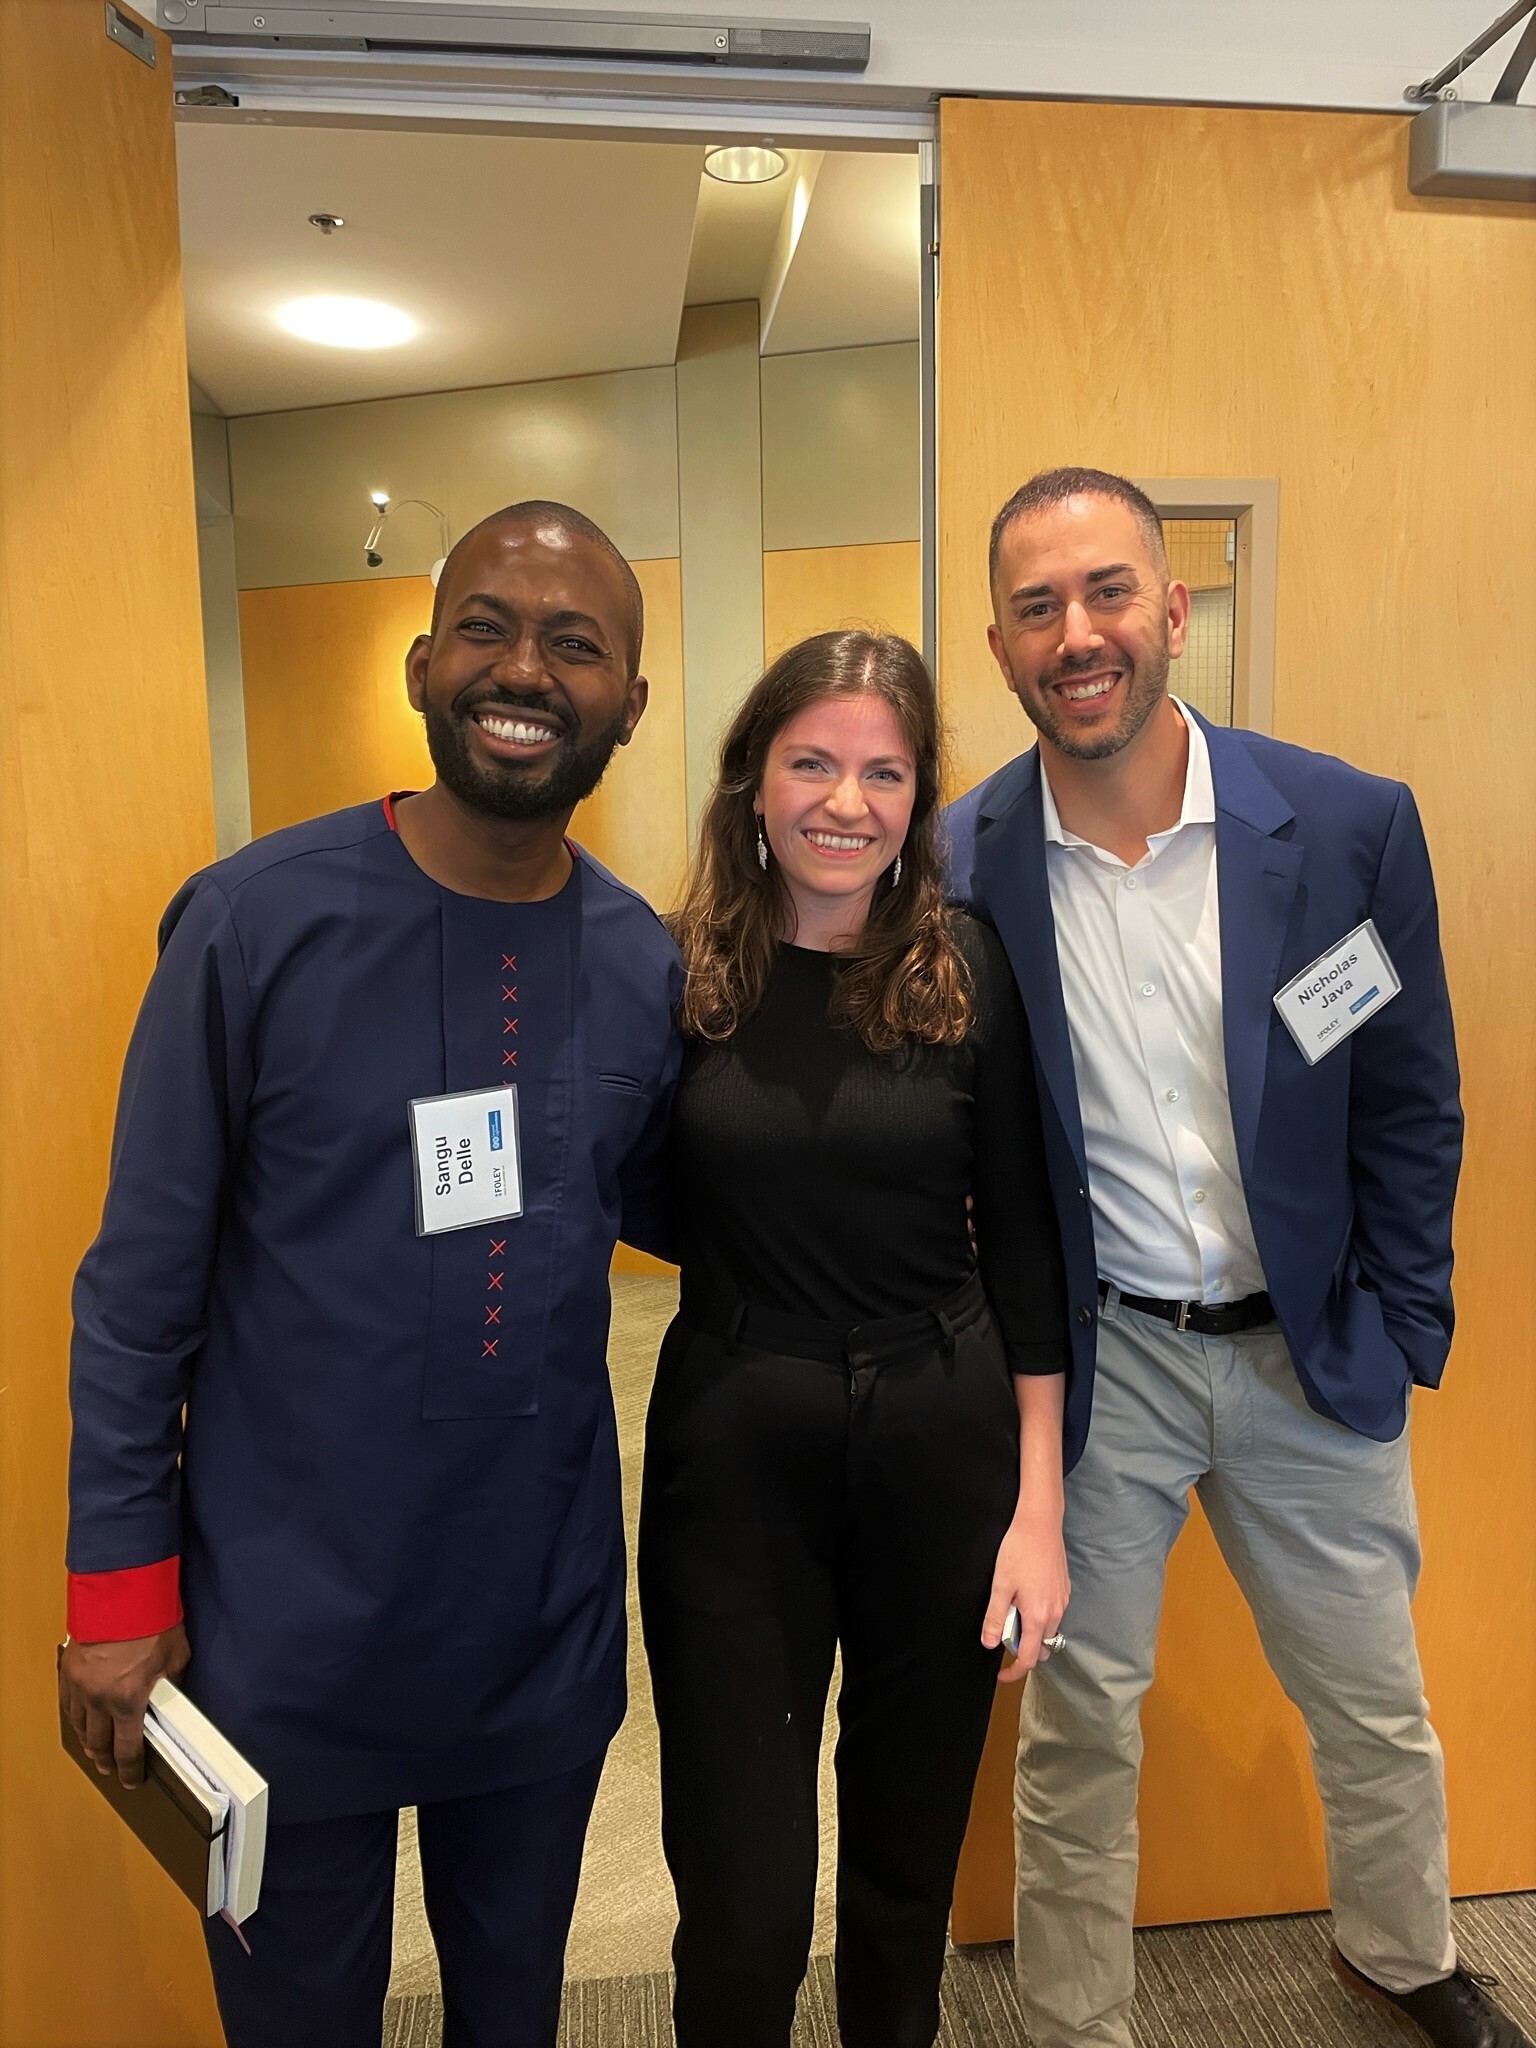 Dr. Sangu Delle, CEO of CarePoint, with two members of the Beyond Capital Ventures team Mathilde Beniflah, Director of Operations, and Nicholas Java, Venture Partner at a recent event.